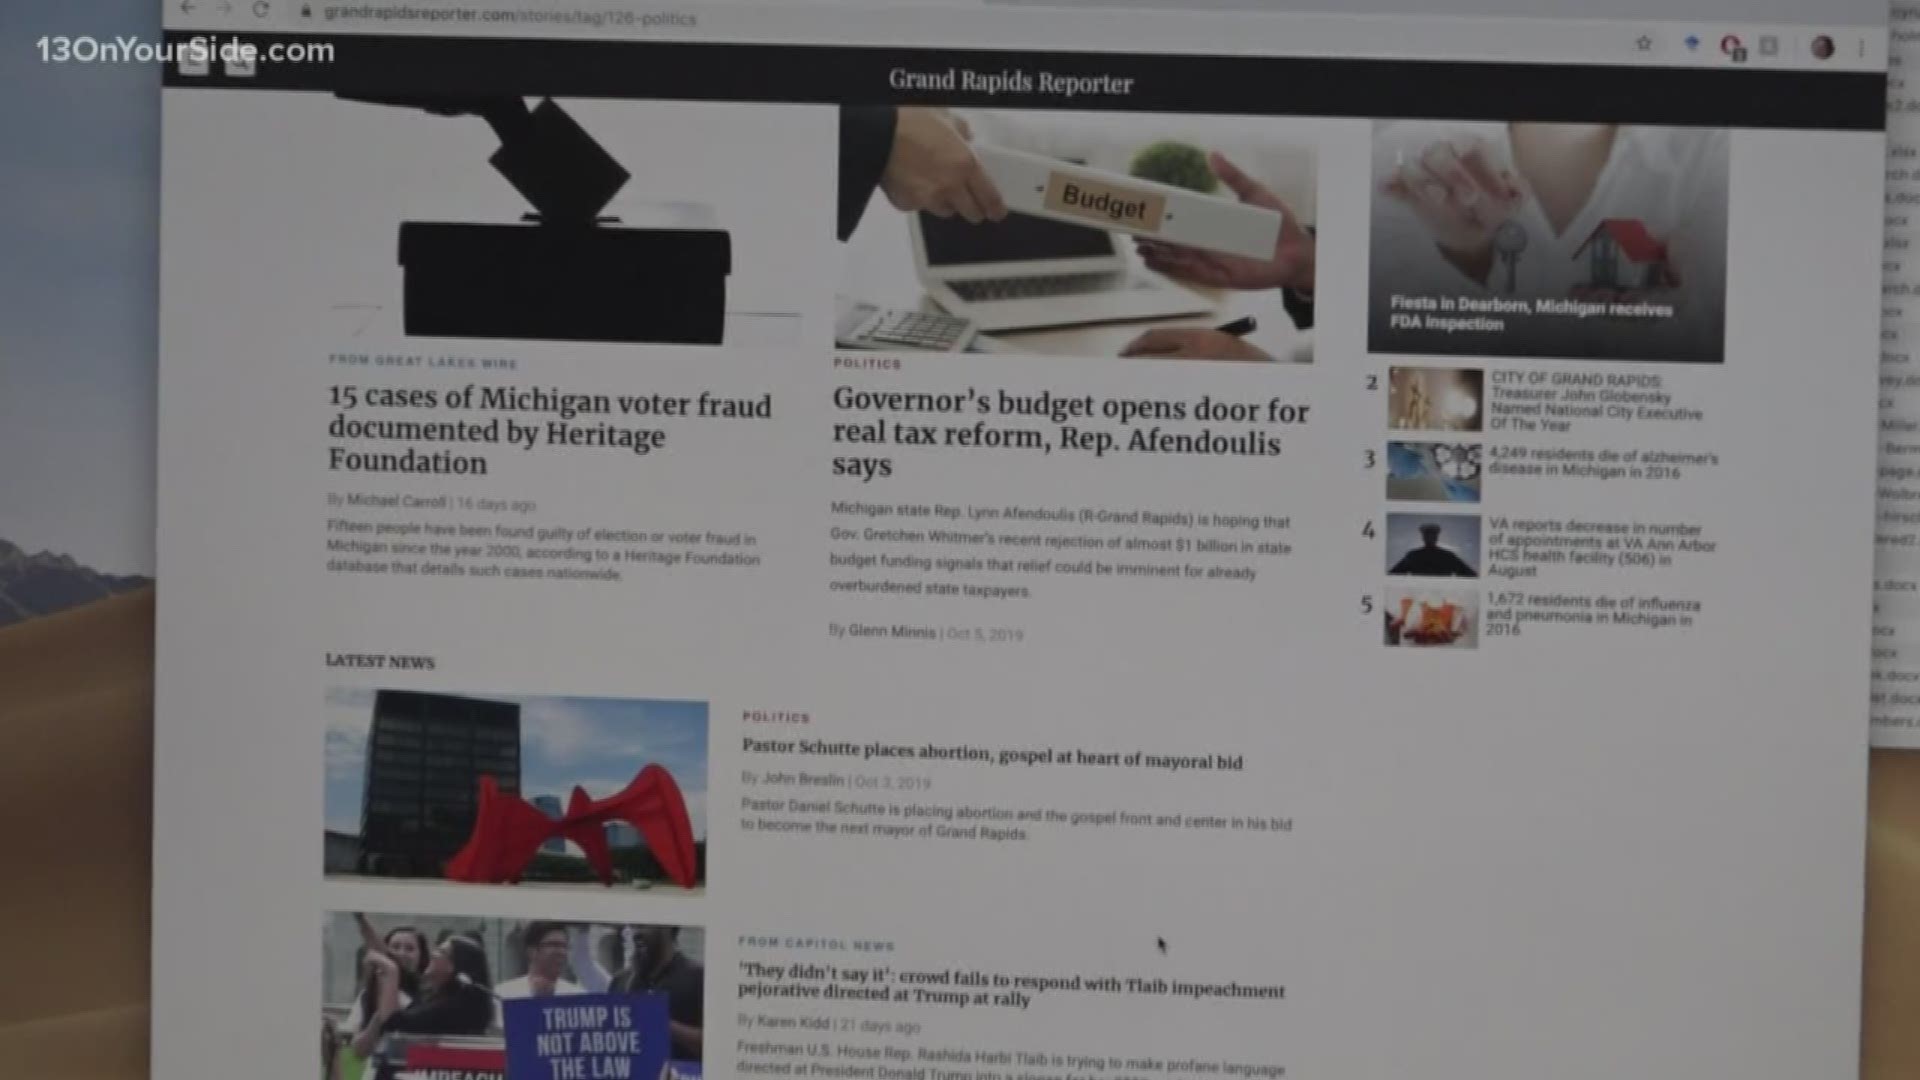 Dozens of sites including the Grand Rapids Reporter and the Lasing Sun have been posing as local news sites.